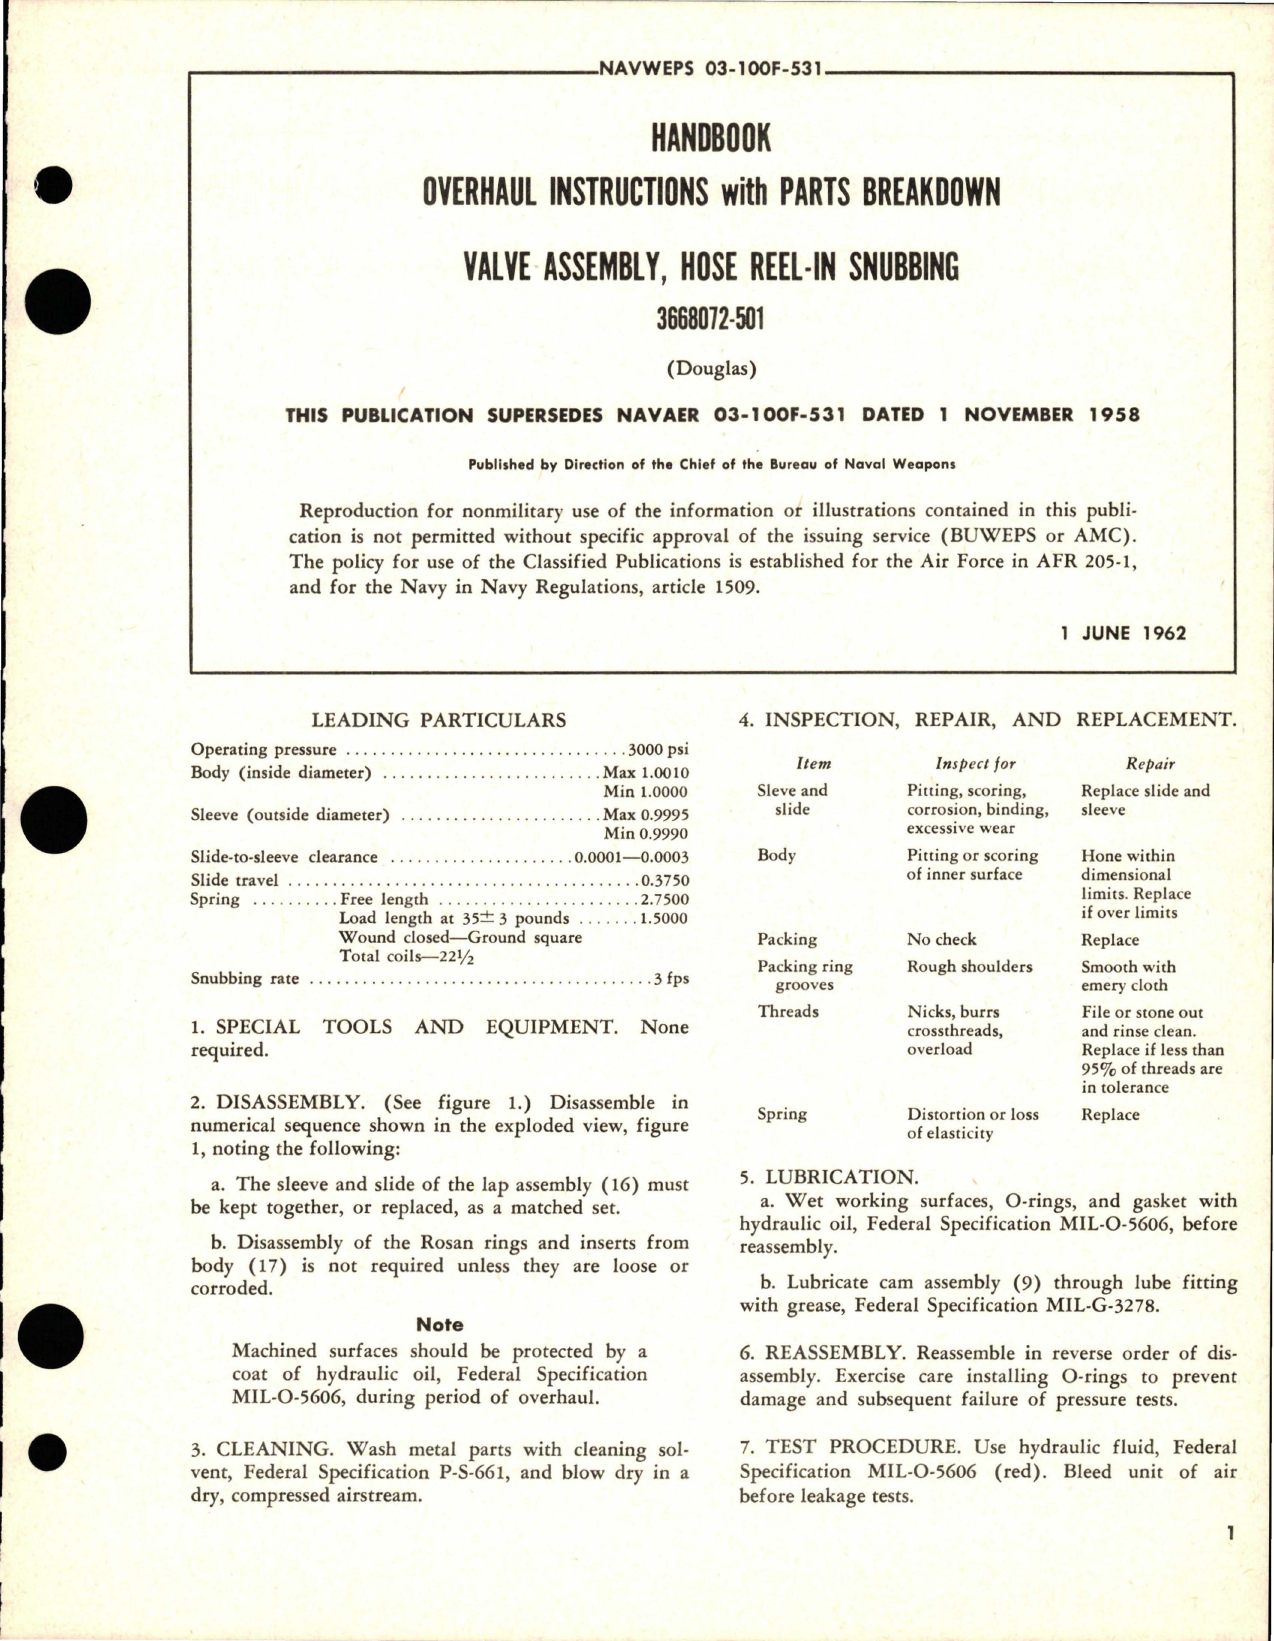 Sample page 1 from AirCorps Library document: Overhaul Instructions with Parts Breakdown for Hose Reel-In Snubbing Valve Assembly - 3668072-501 